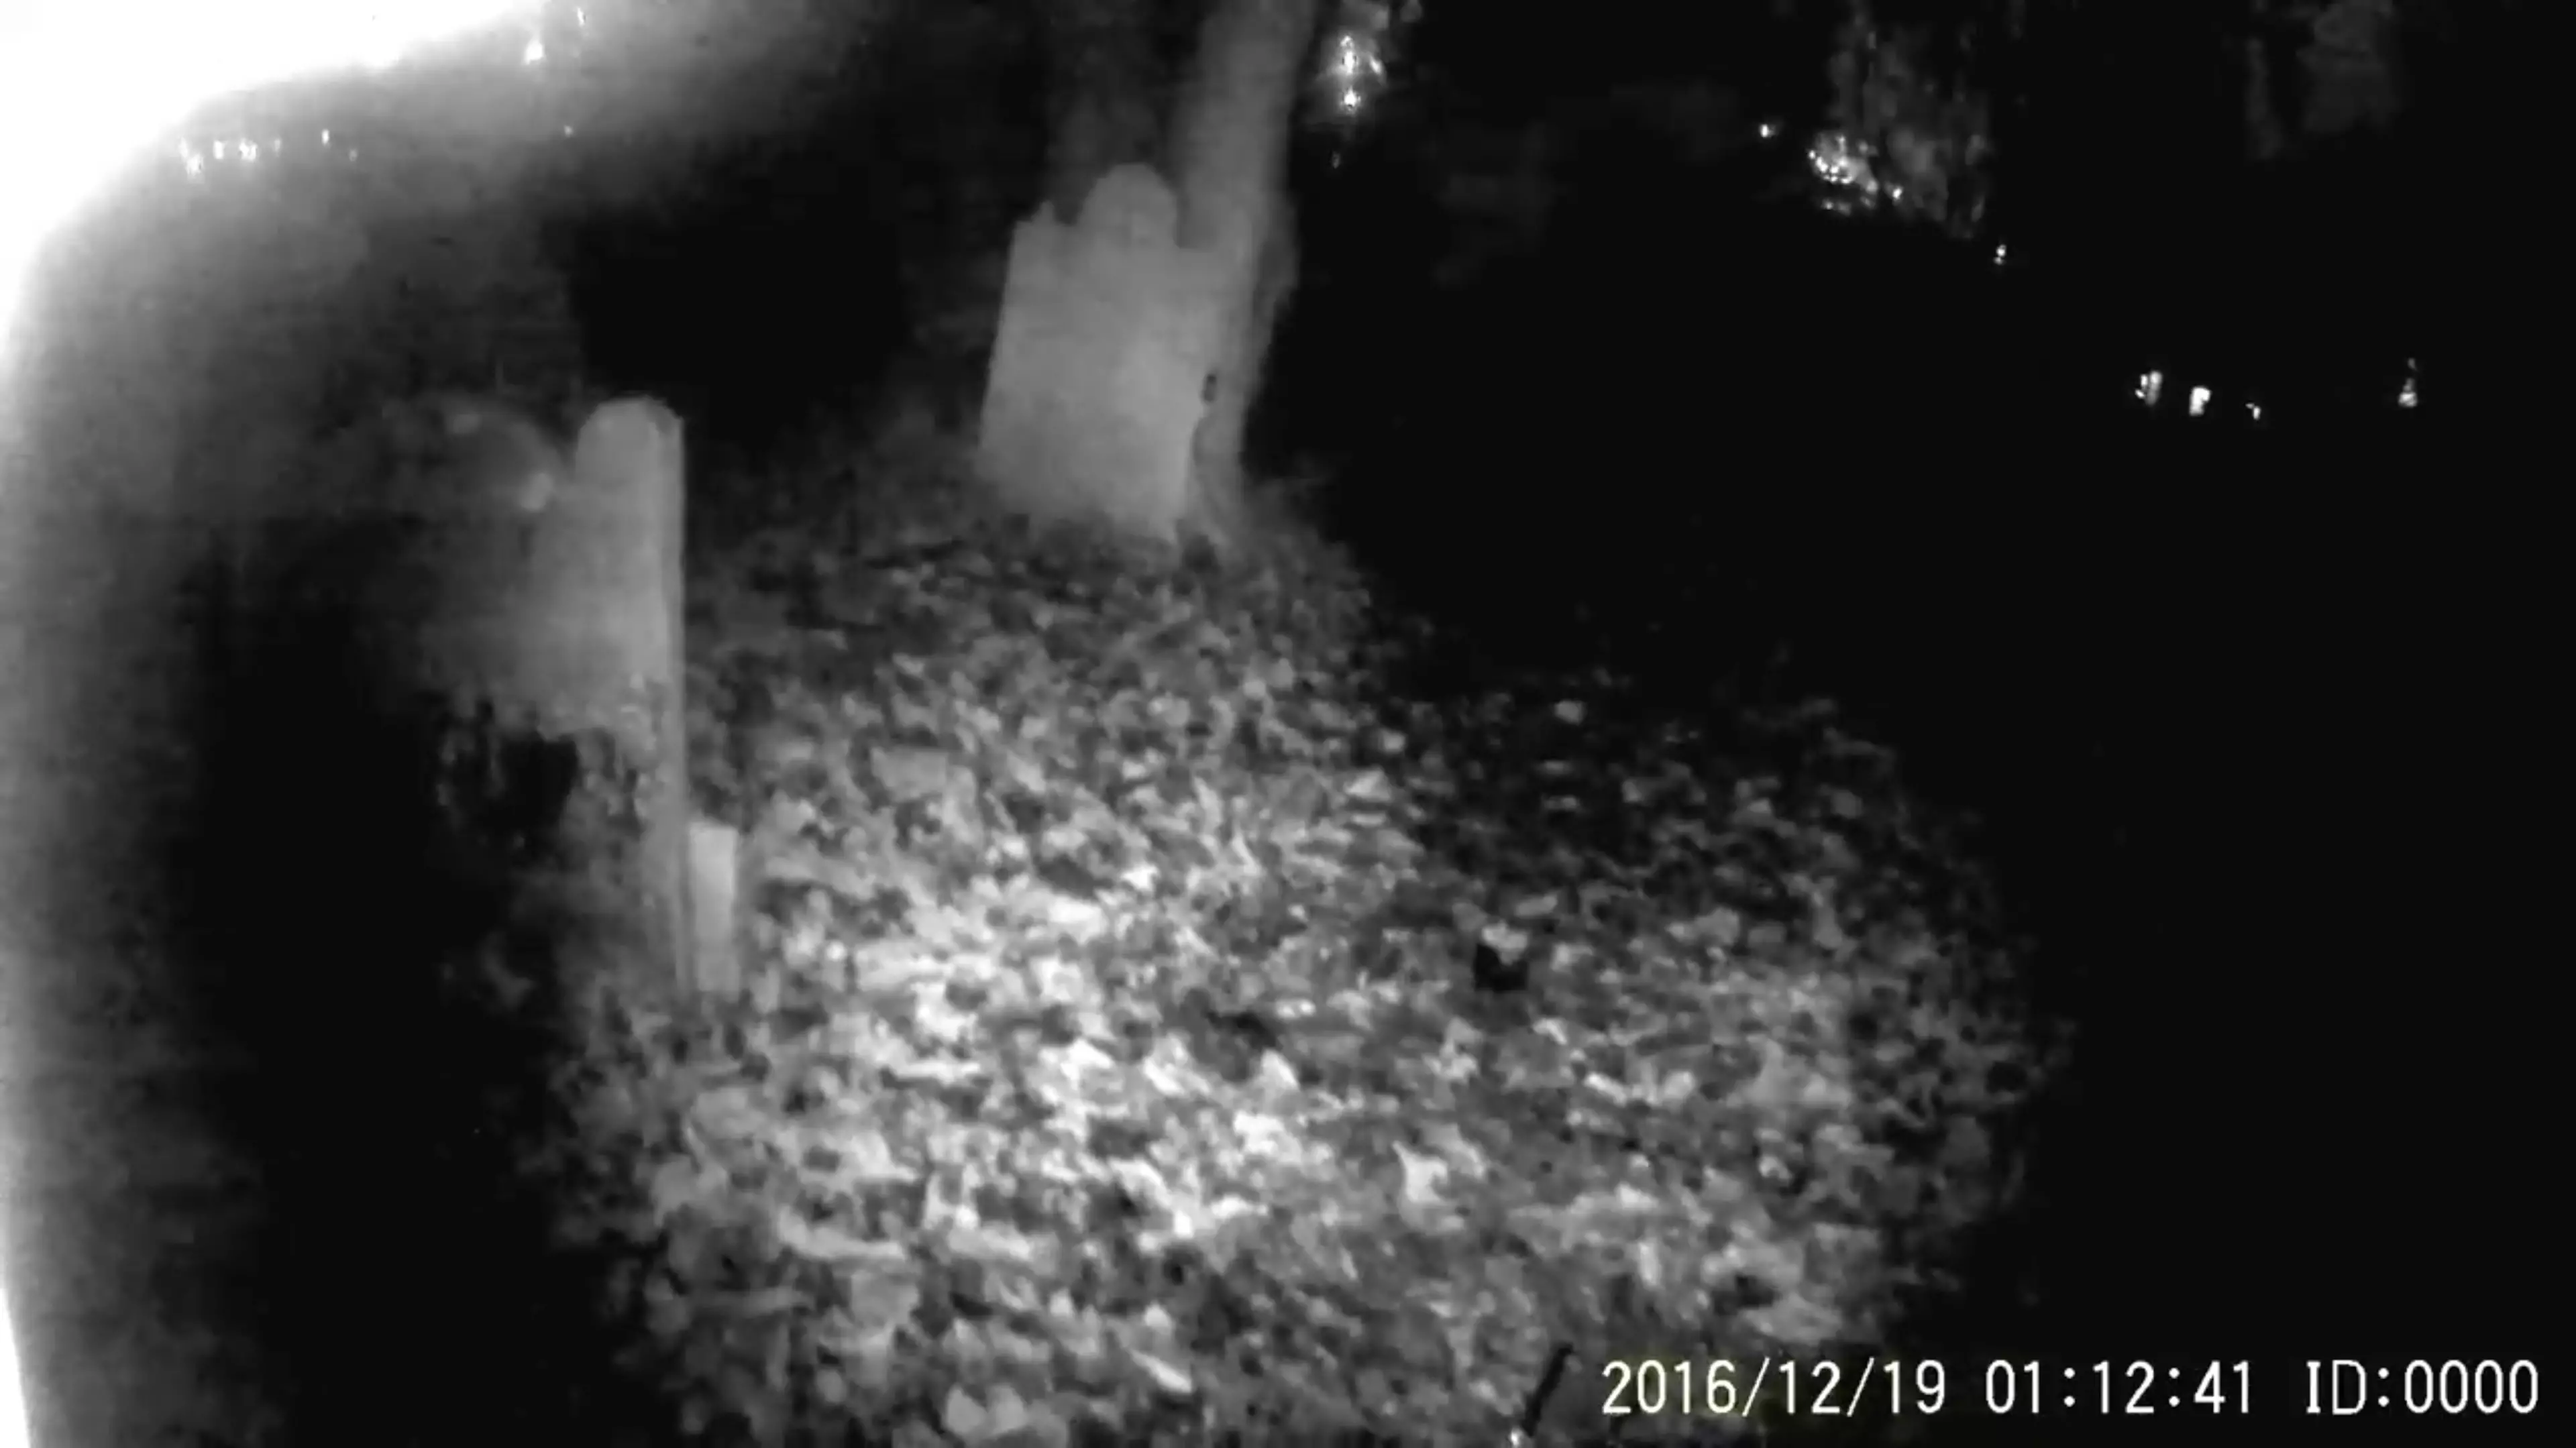 Video Shows 'Ghost' Flying Towards Camera In 800-Year-Old Cemetery 